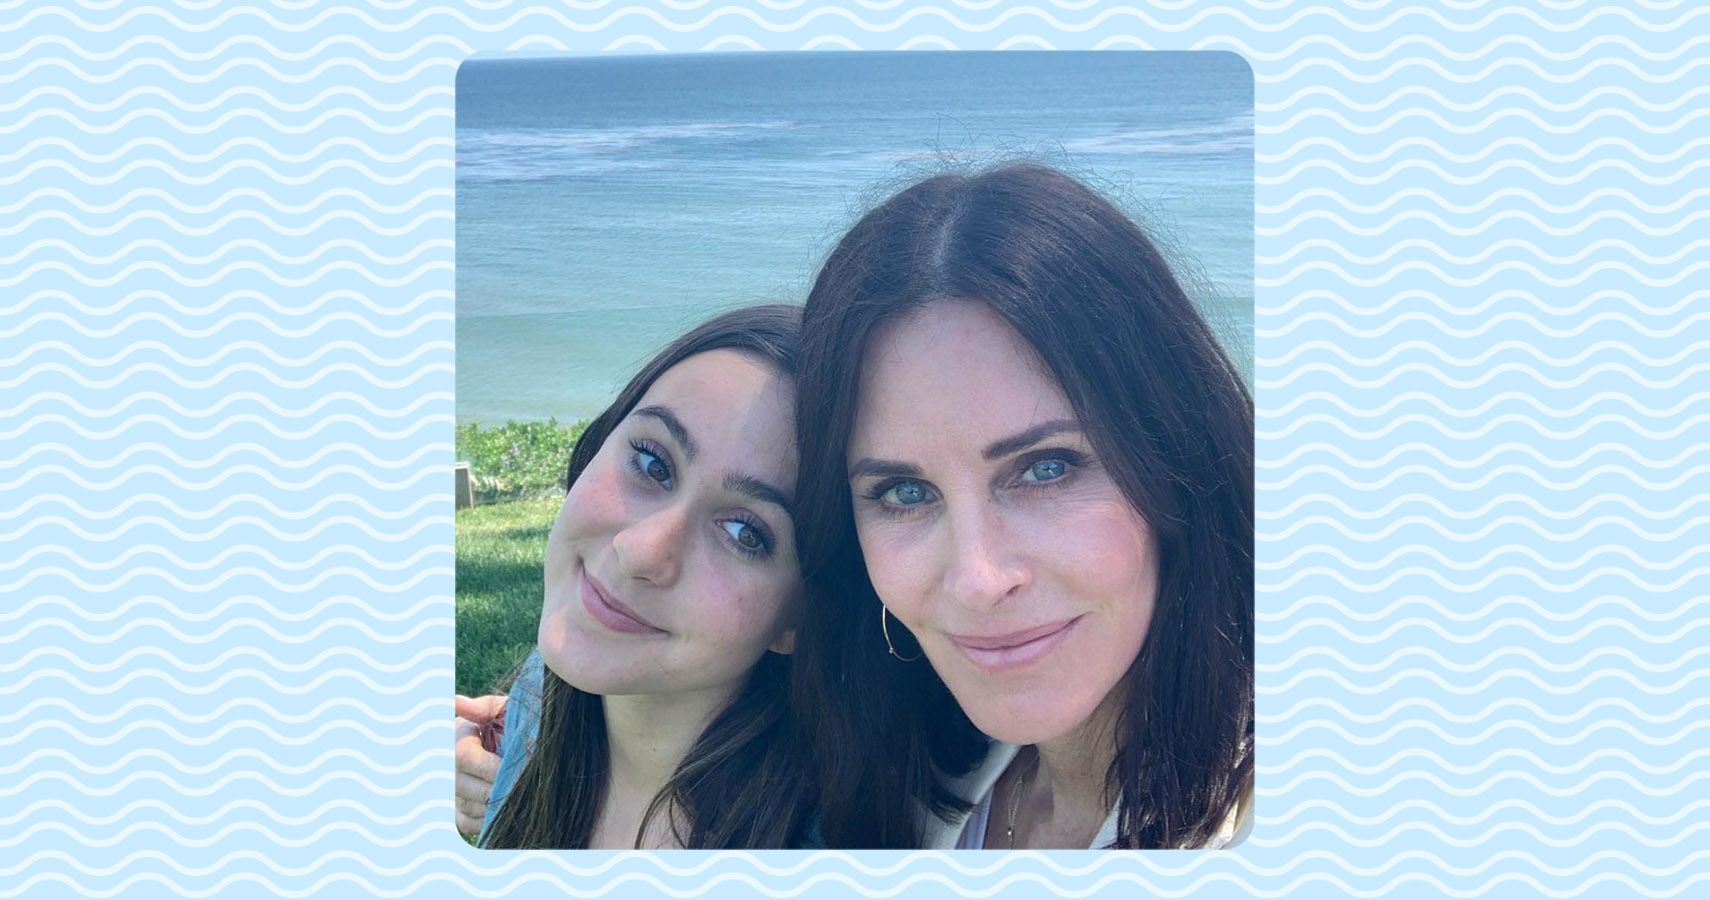 7 Things You Likely Didn’t Know About Courteney Cox’s Kid